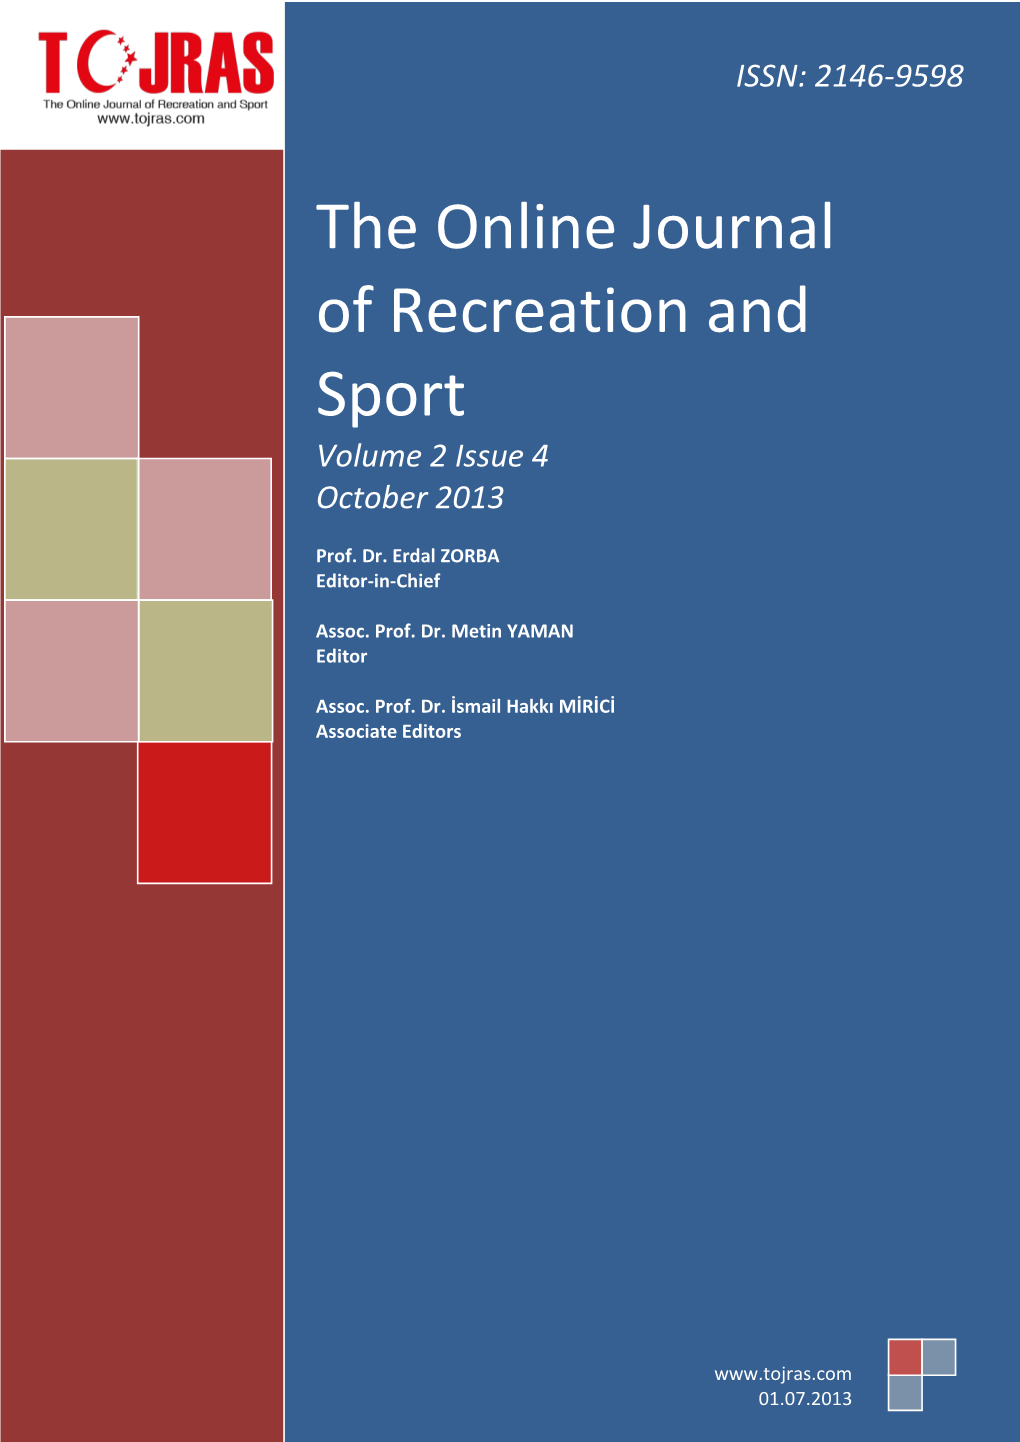 The Online Journal of Recreation and Sport Volume 2 Issue 4 October 2013